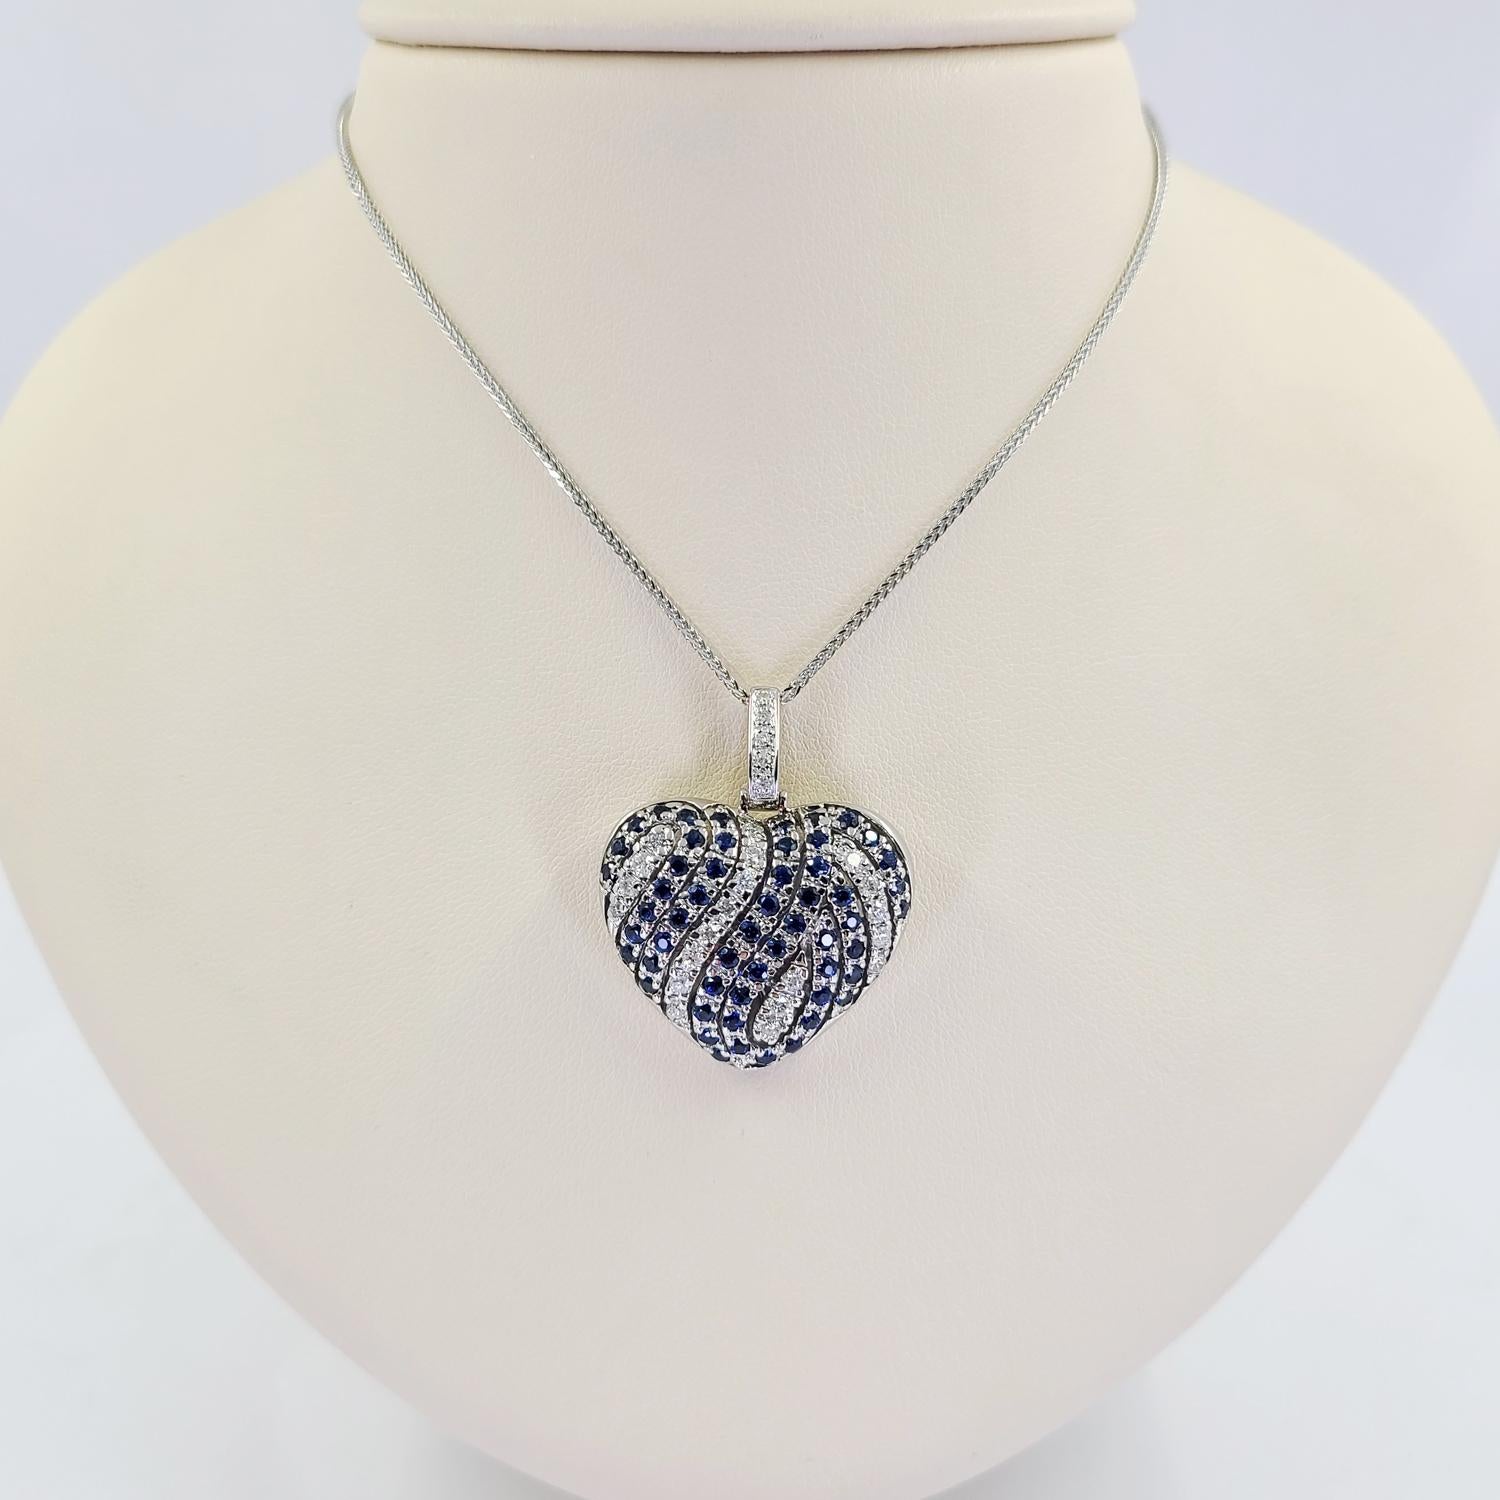 14 Karat White Gold Puffed Swirl Heart Pendant Necklace Featuring 25 Round Brilliant Cut Diamonds of SI Clarity and H/I Color Totaling 0.50 Carats Accented By 54 Round Sapphires Totaling Approximately 1.00 Carat. 16 Inch Chain with 1.4 Inch Slide